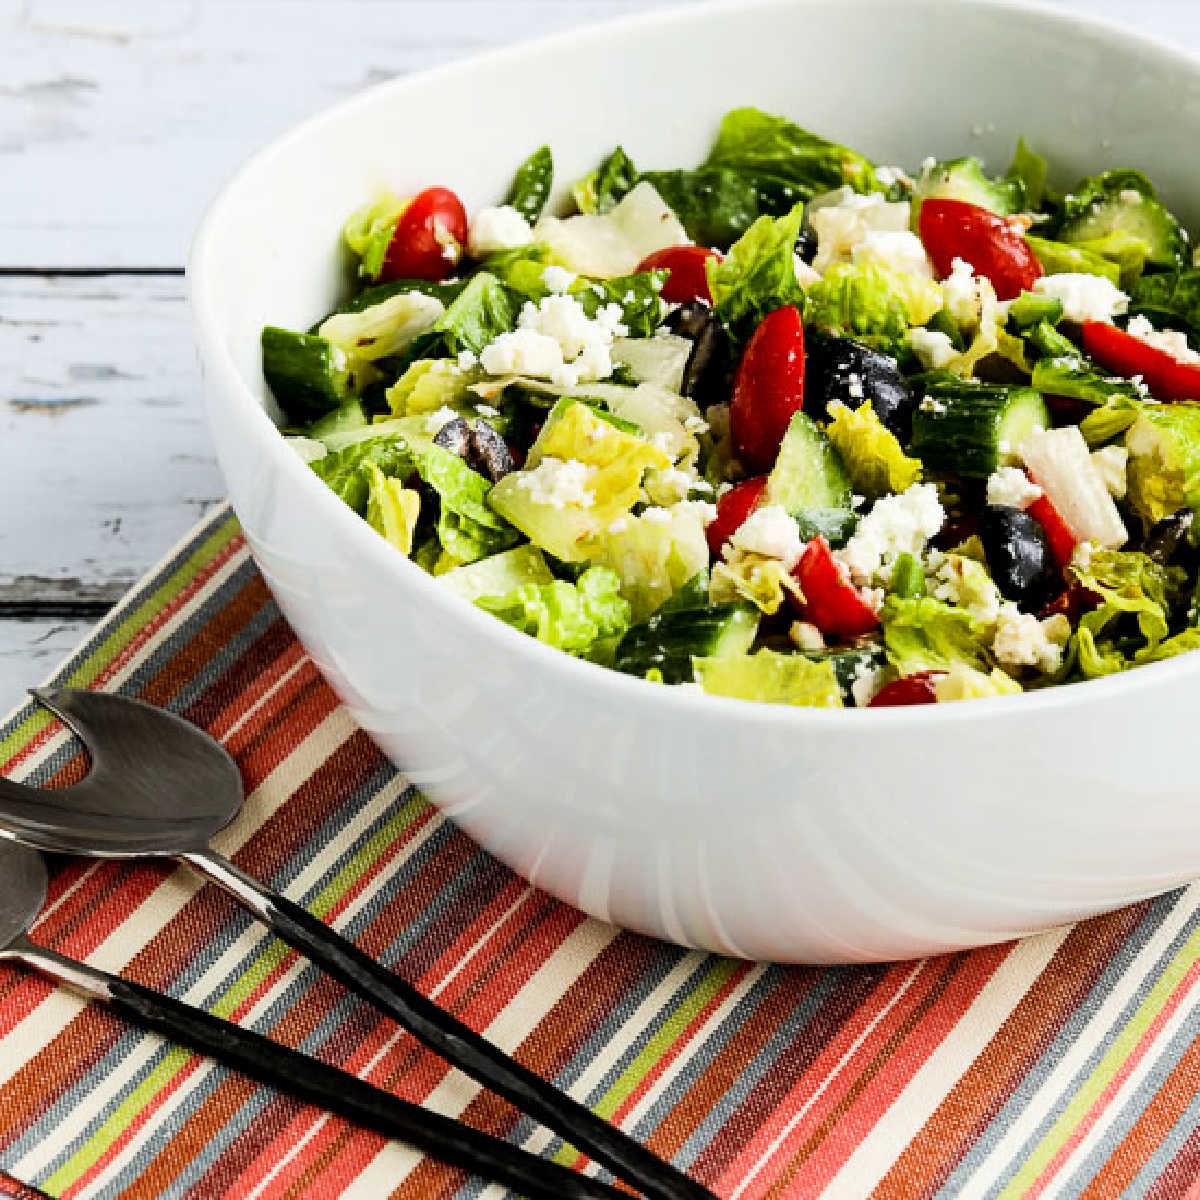 A lettuce Greek salad is shown in a serving bowl with a salad fork.